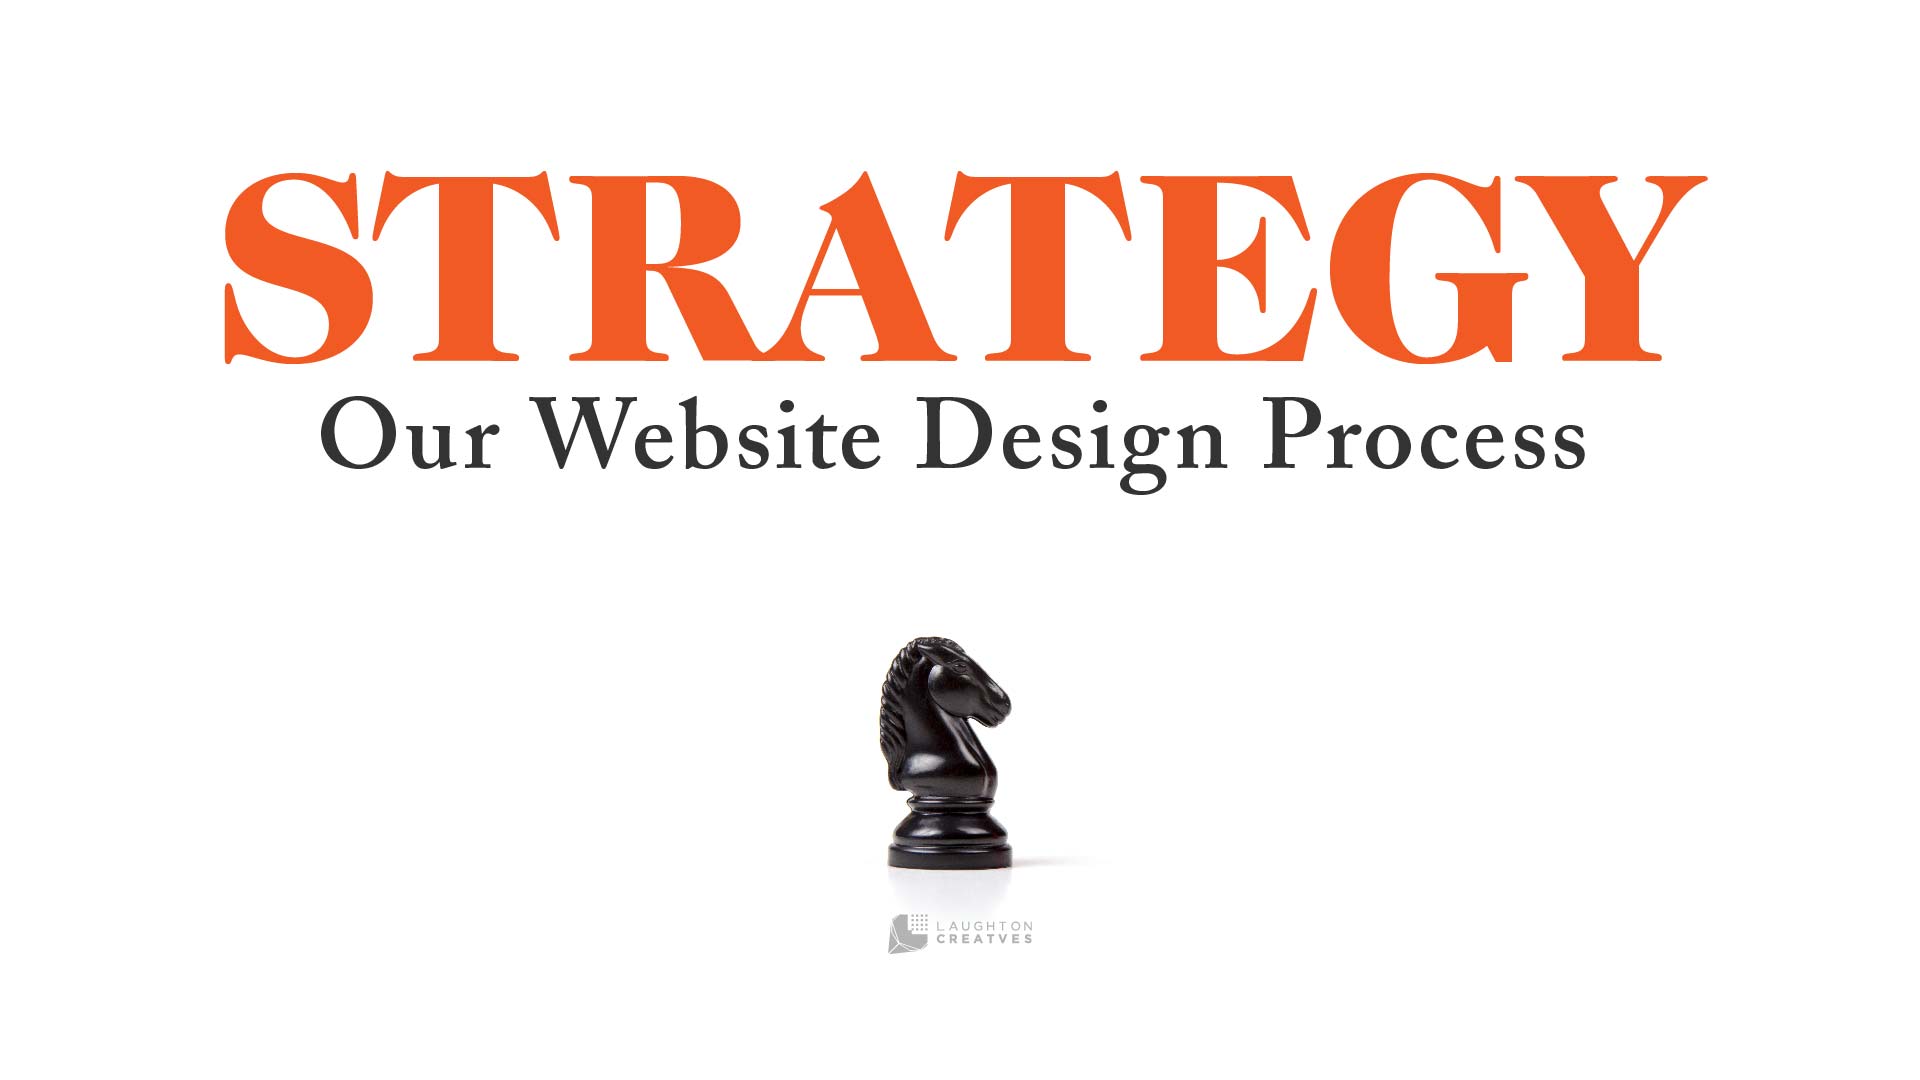 Our Website Design Process in 7 Stages - Laughton Creatves